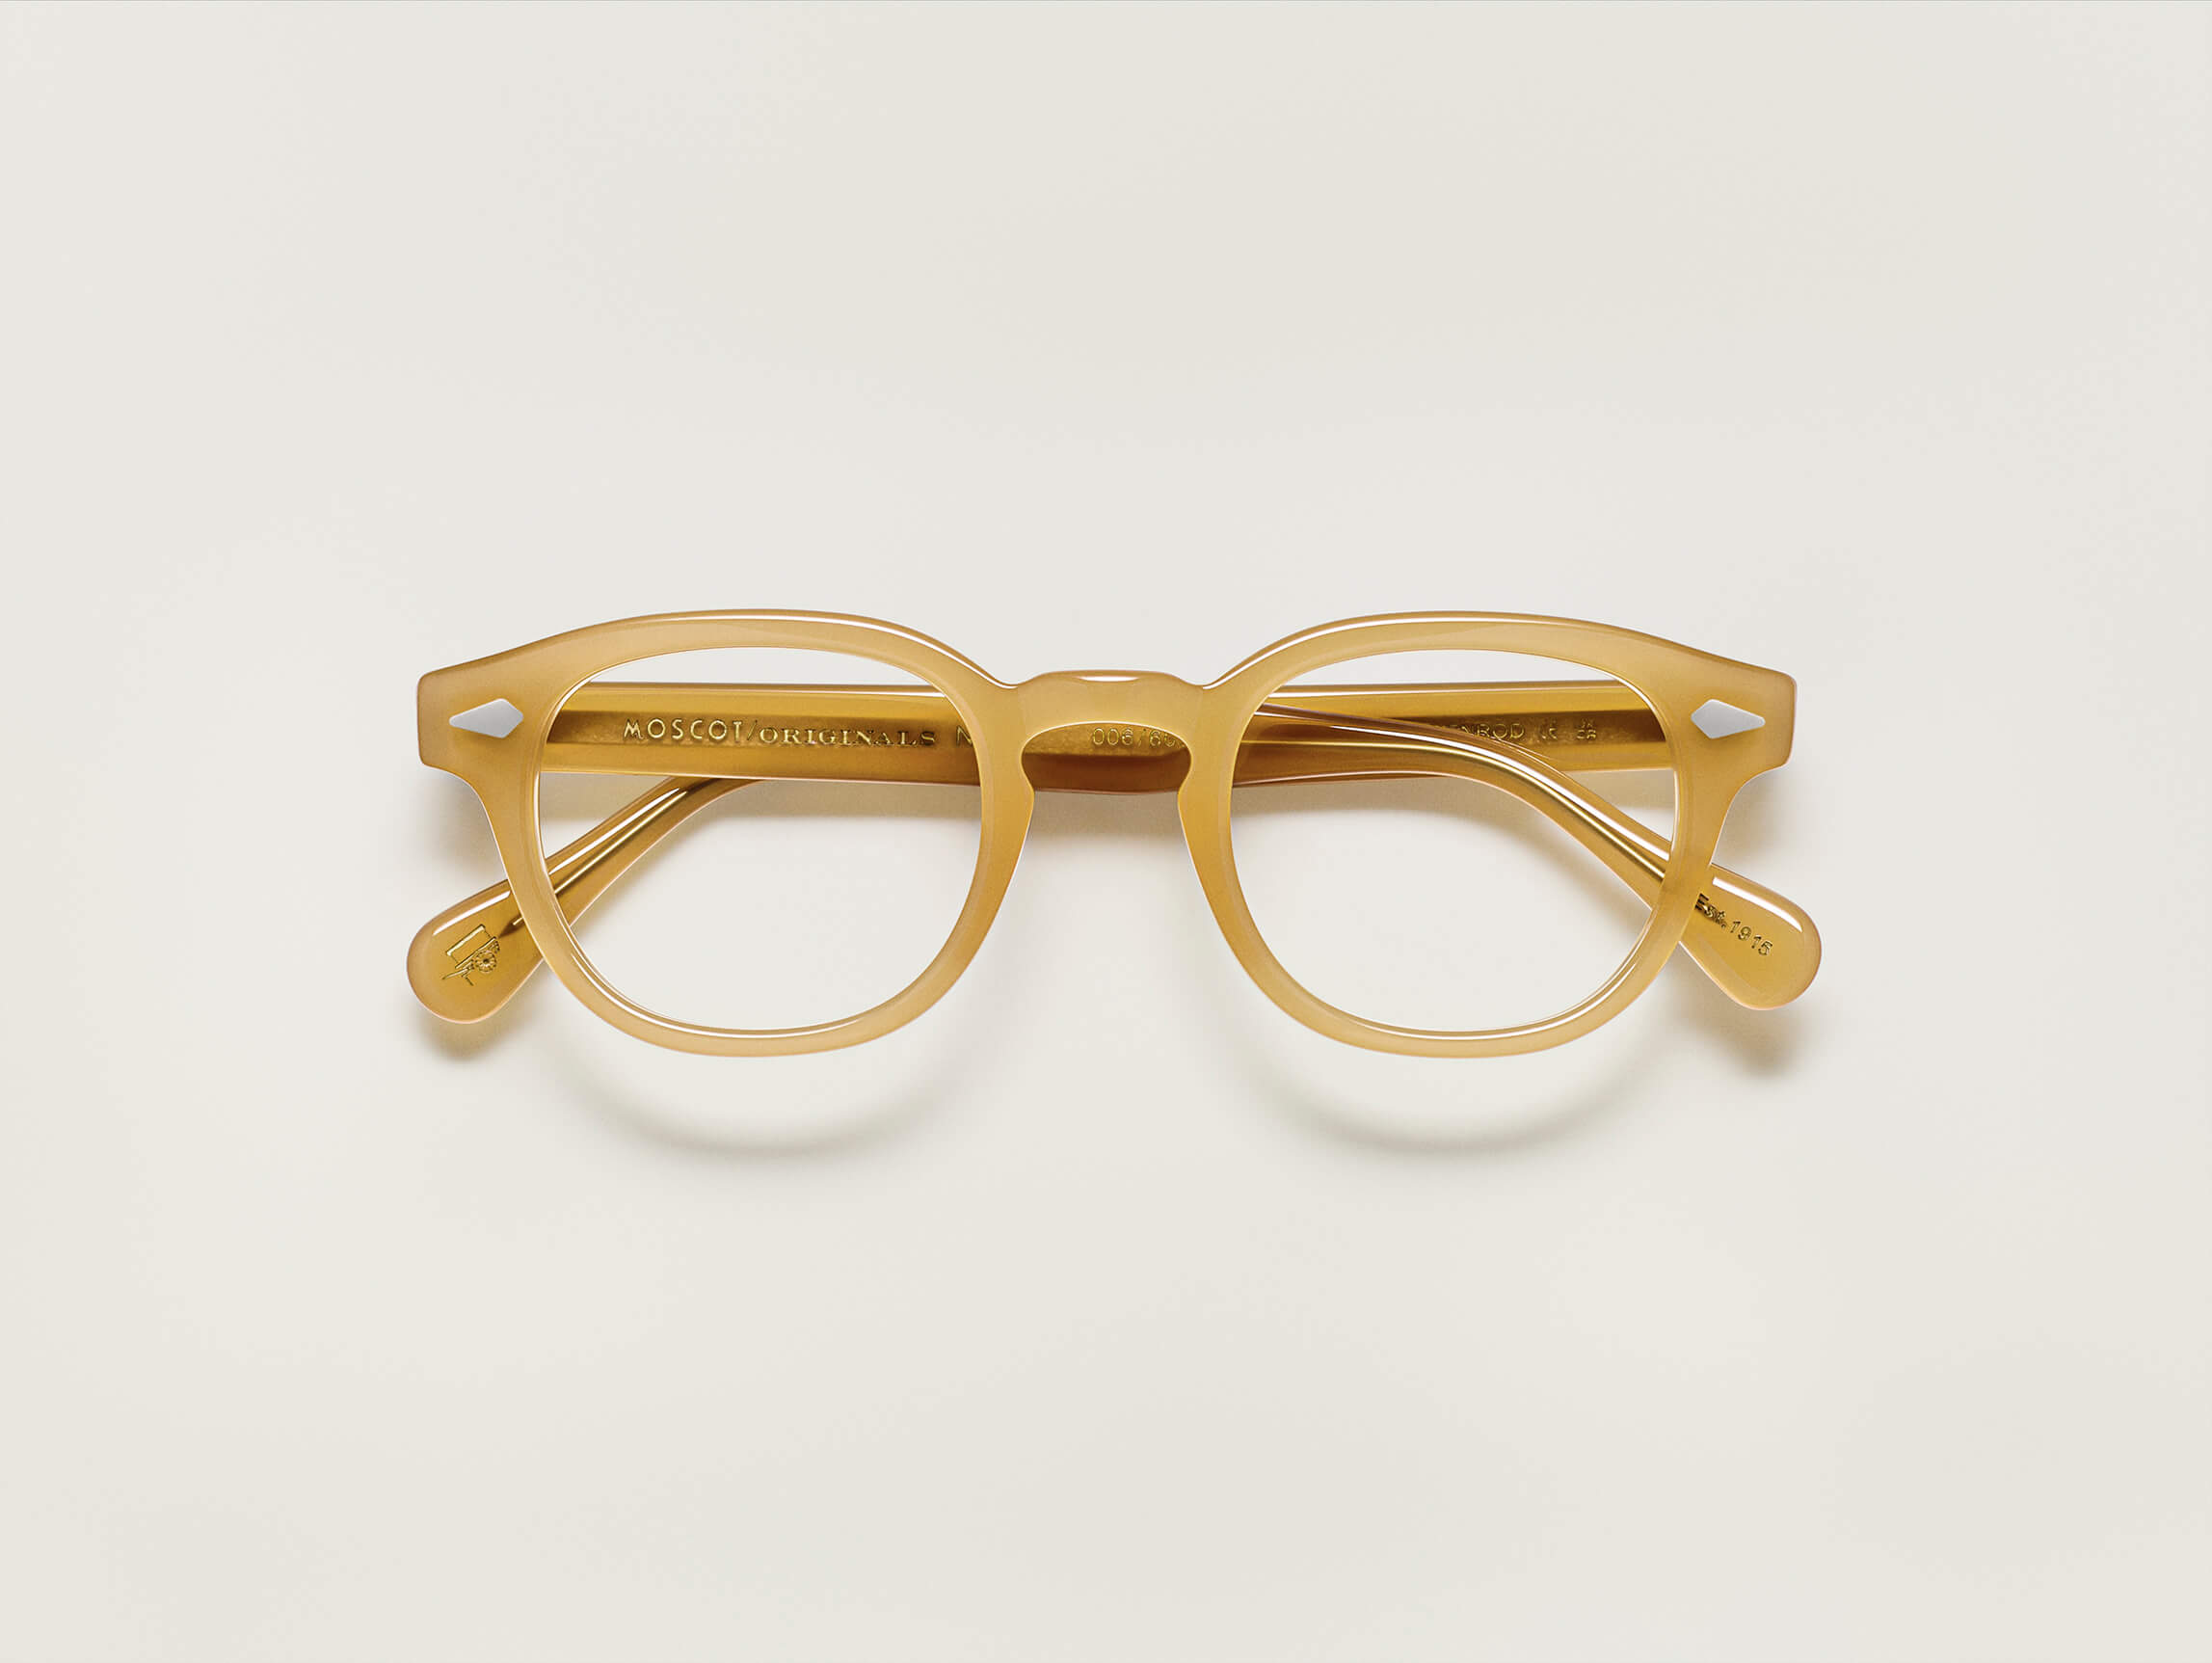 #color_goldenrod | The LEMTOSH Limited Edition in Goldenrod